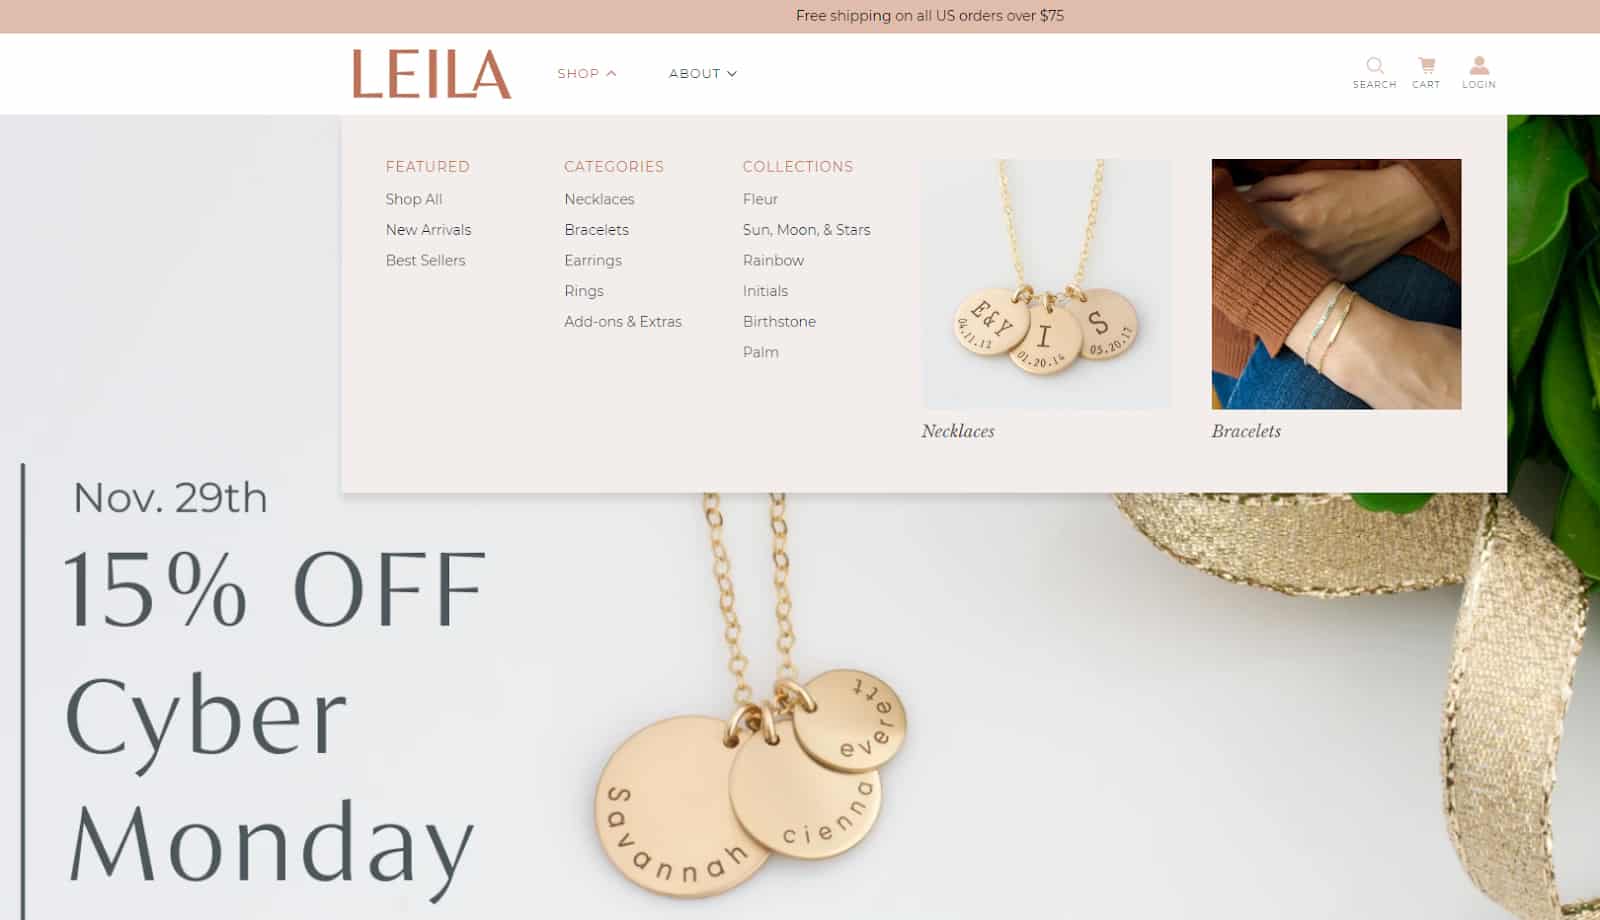 Image of Leila home page.